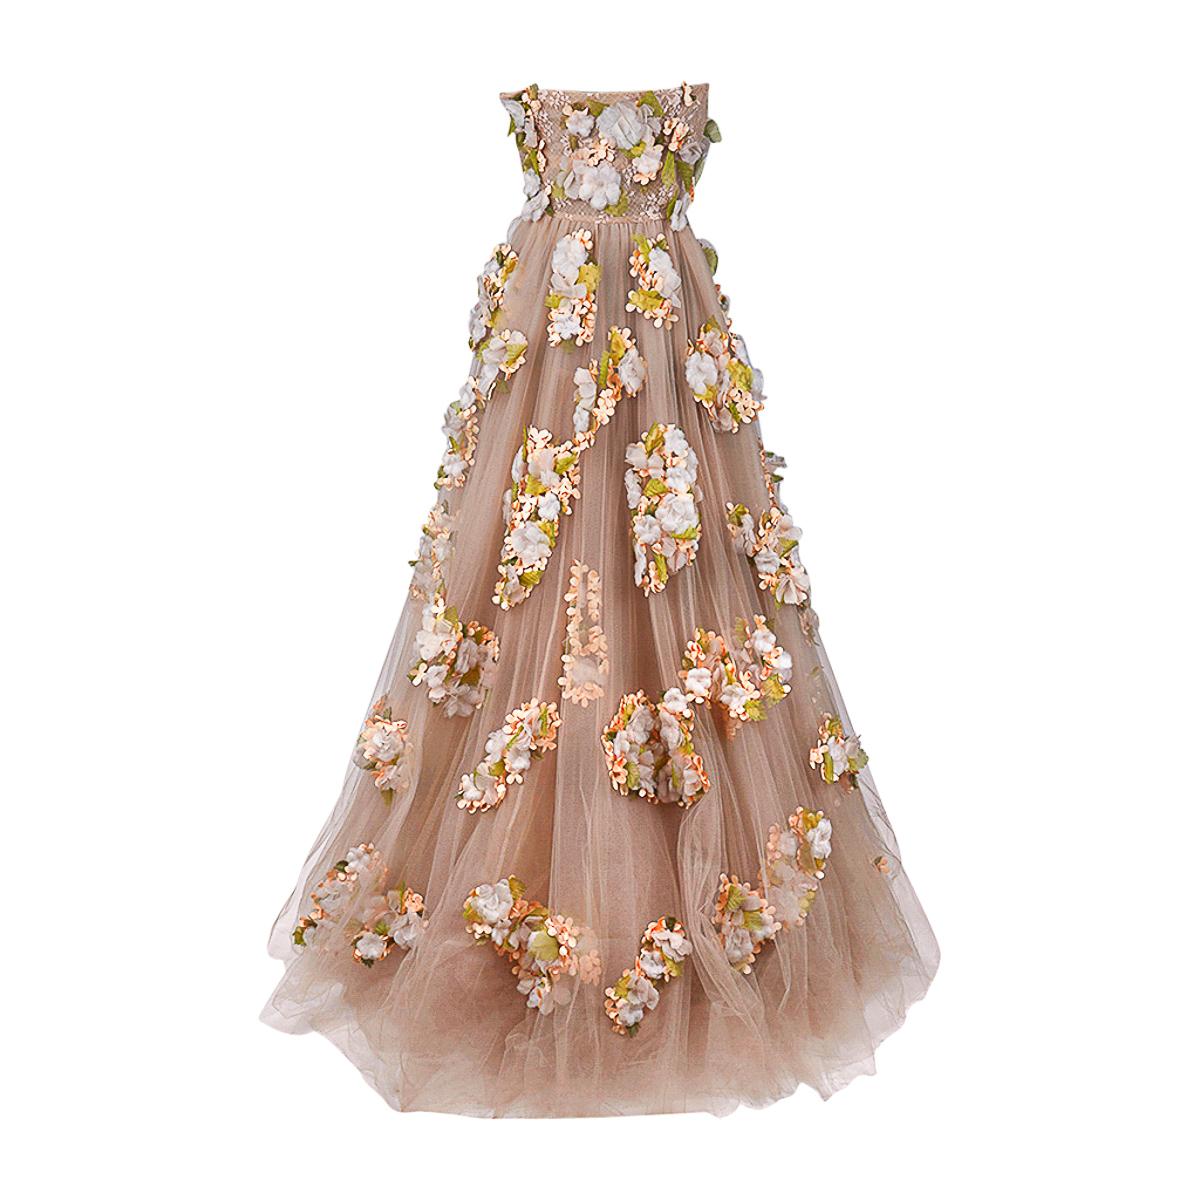 Valentino Strapless Empire Nude Flower Adorned Gown 1 of 2 Size 0 For Sale 1